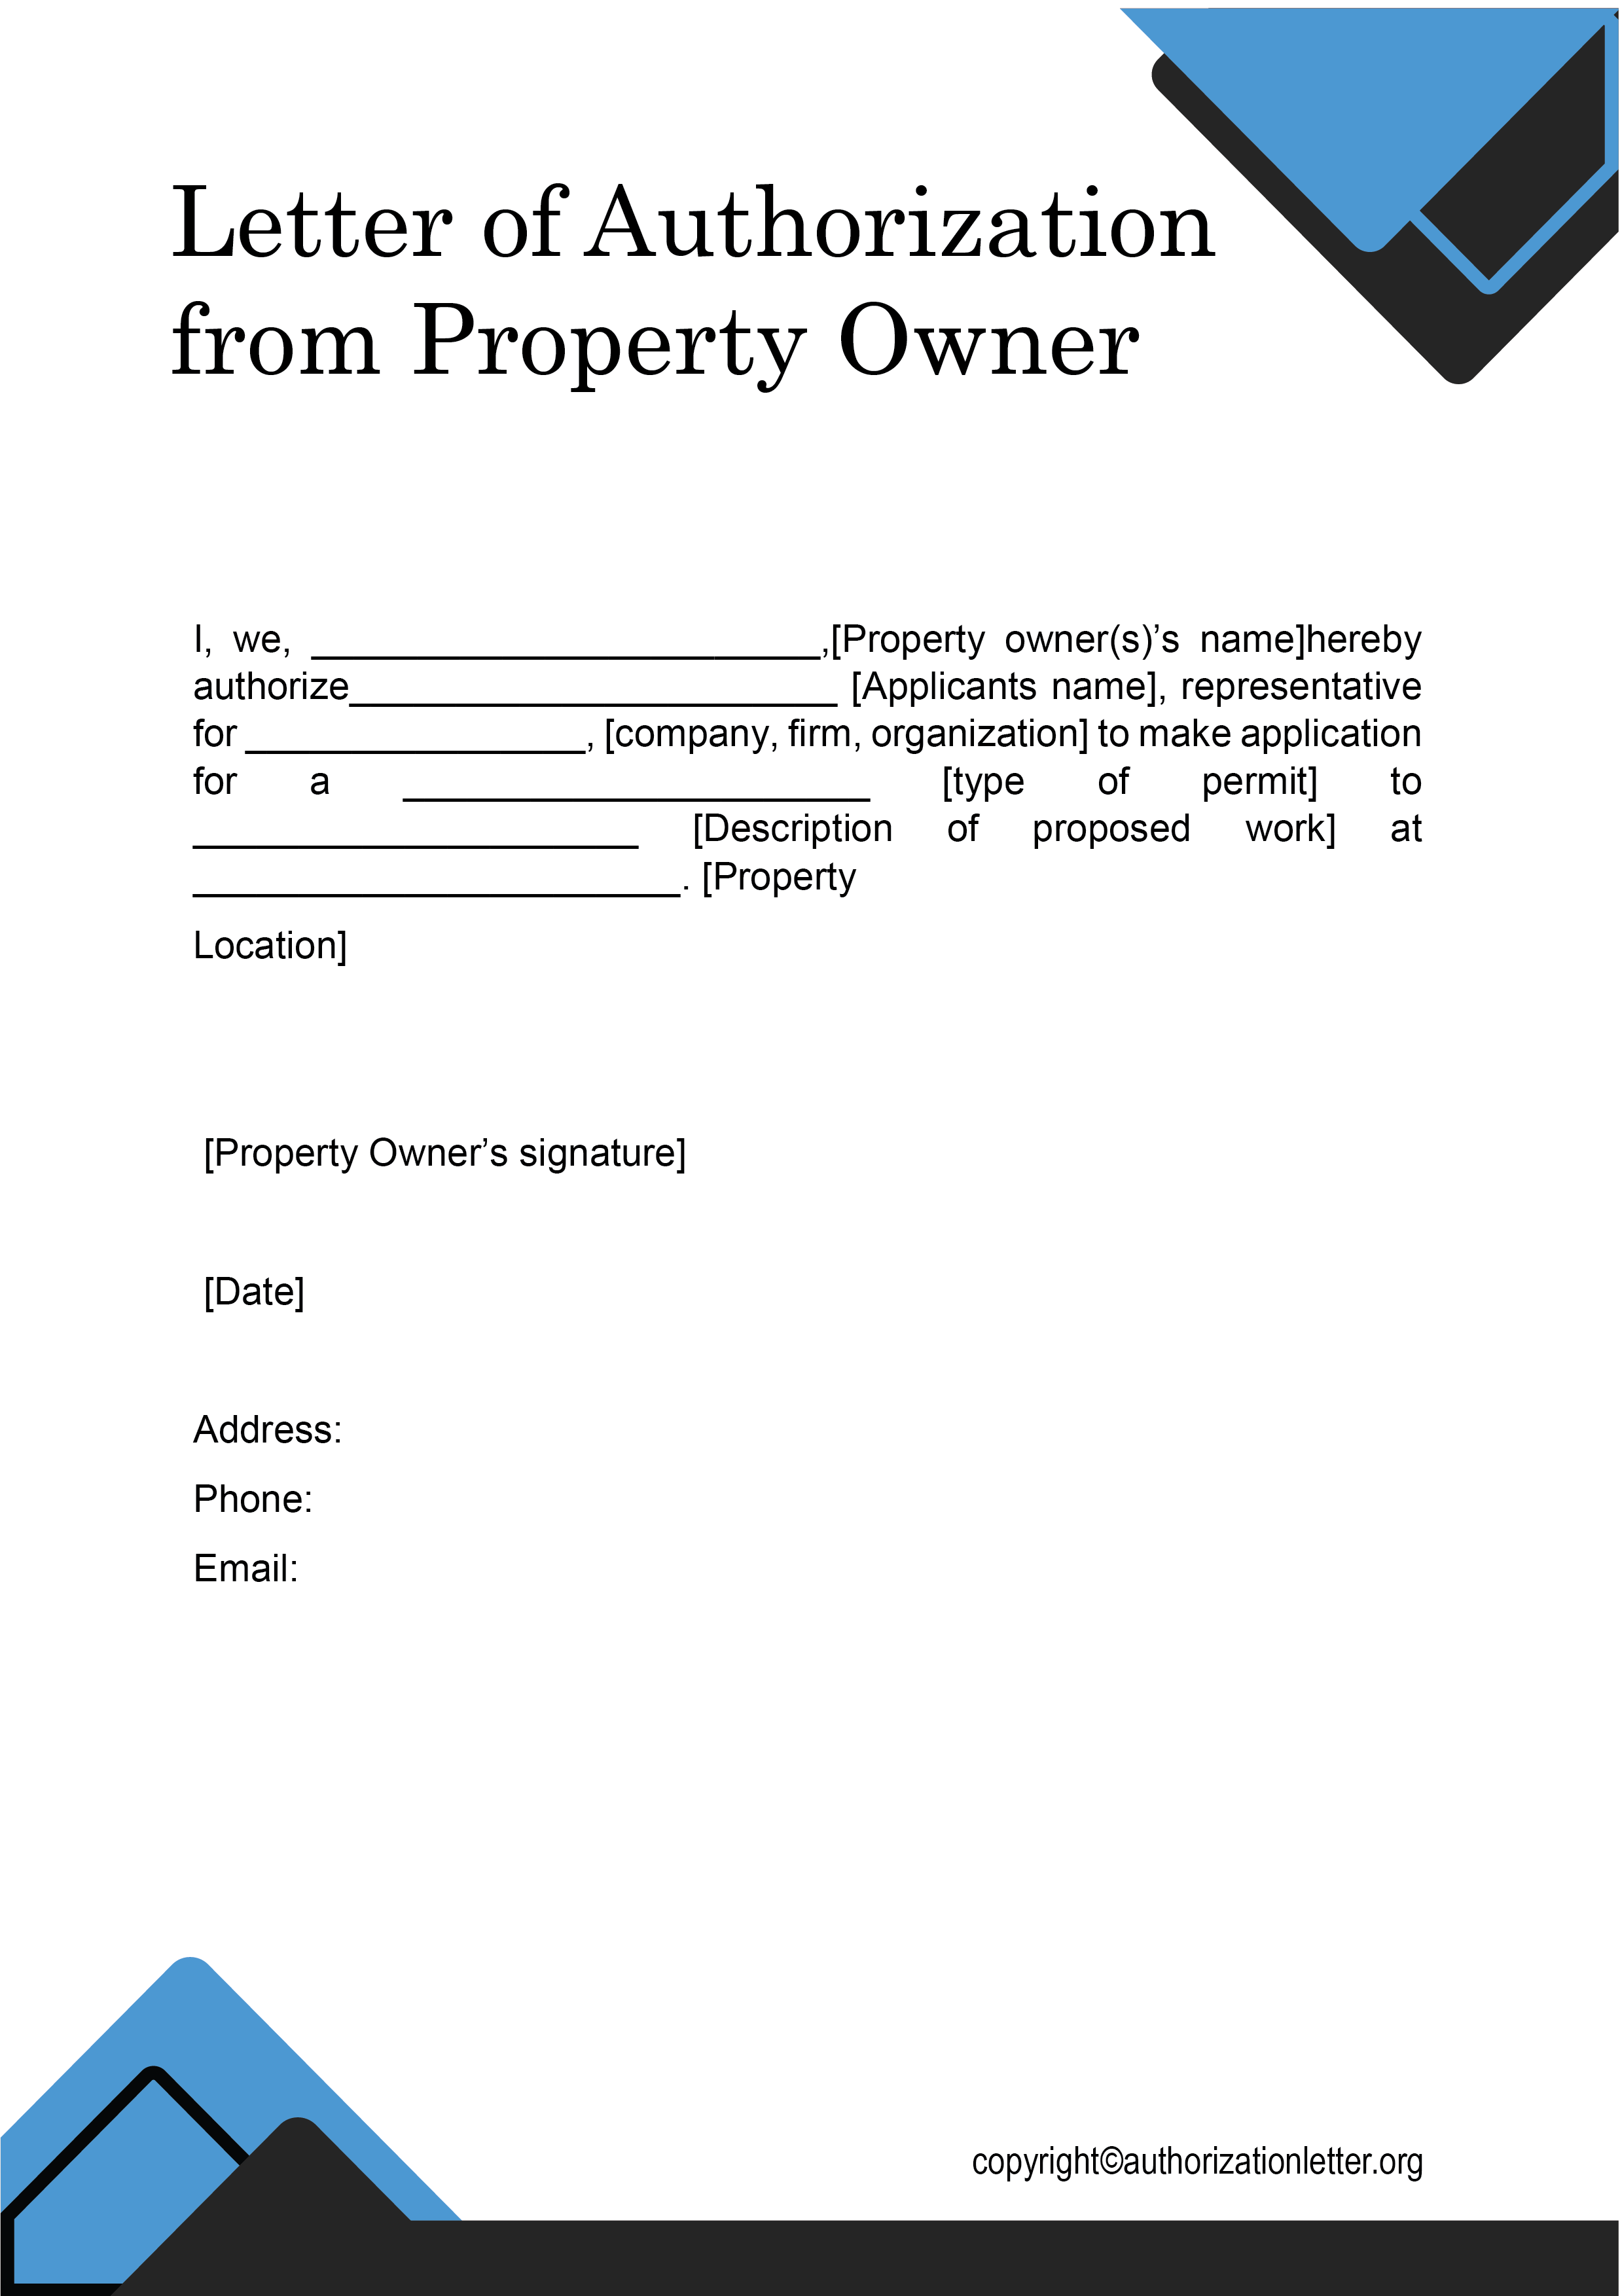 Letter of Authorization from Property Owner